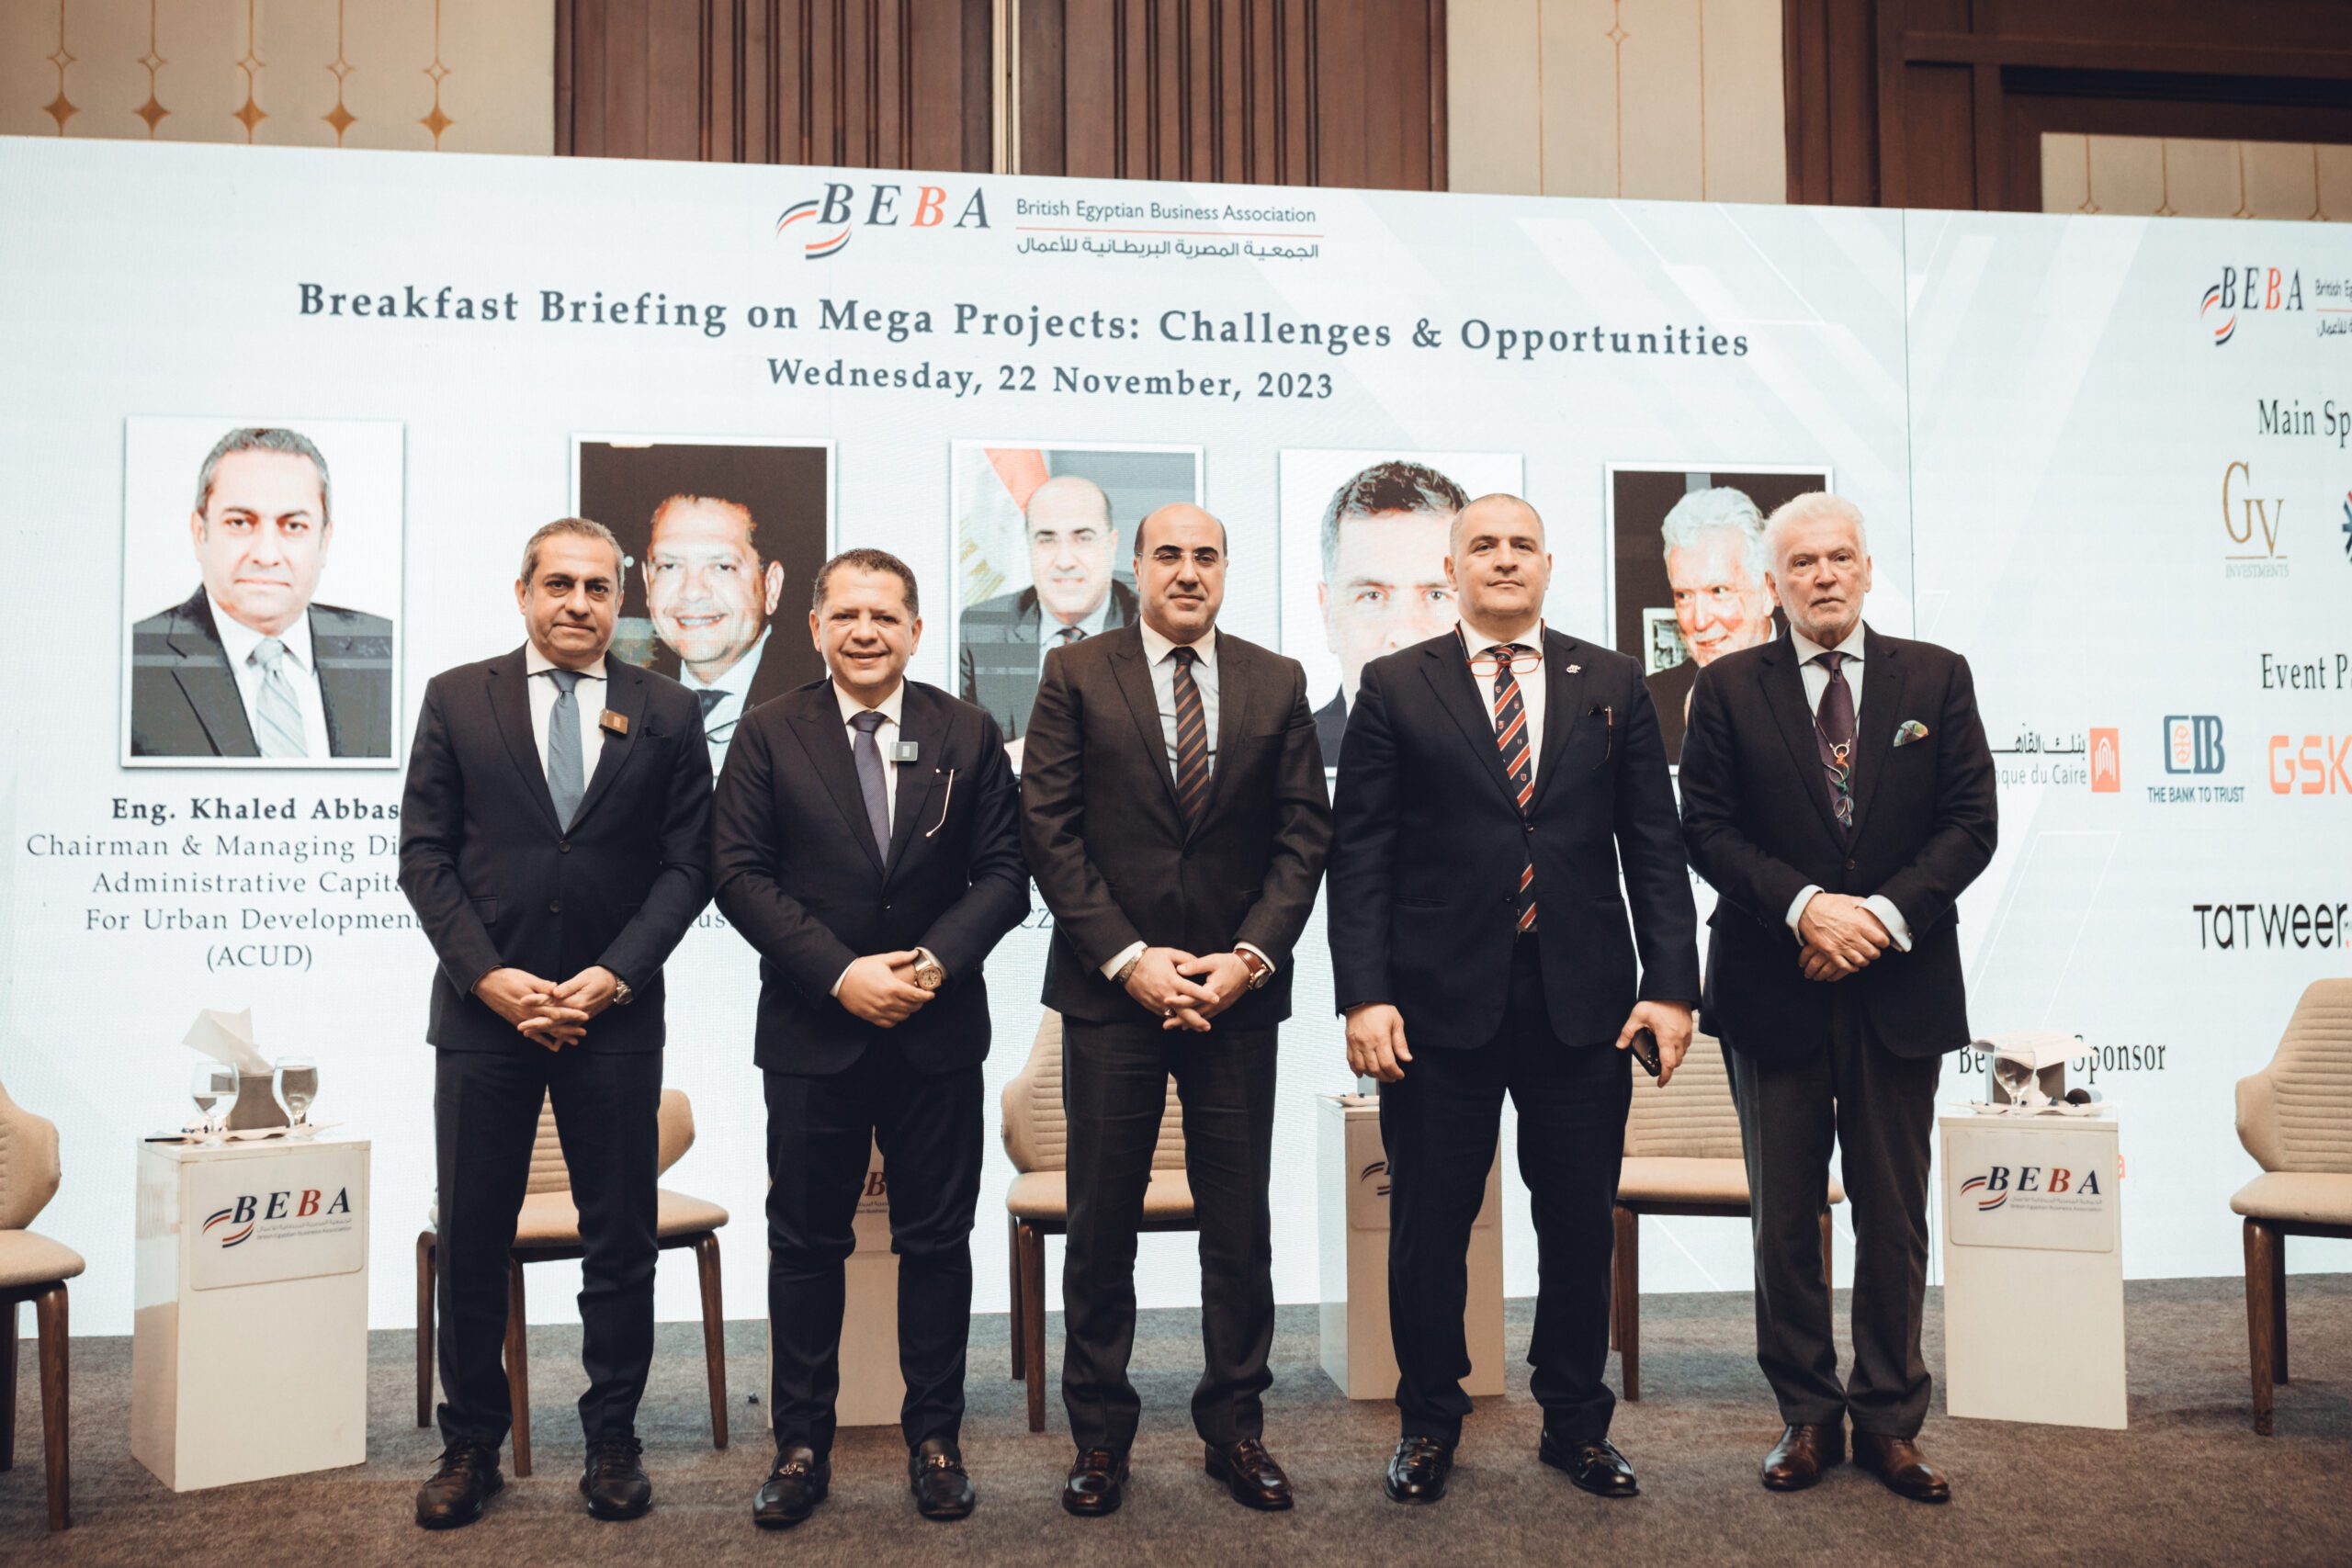 Breakfast Briefing on Mega Projects in Egypt: Challenges & Opportunity